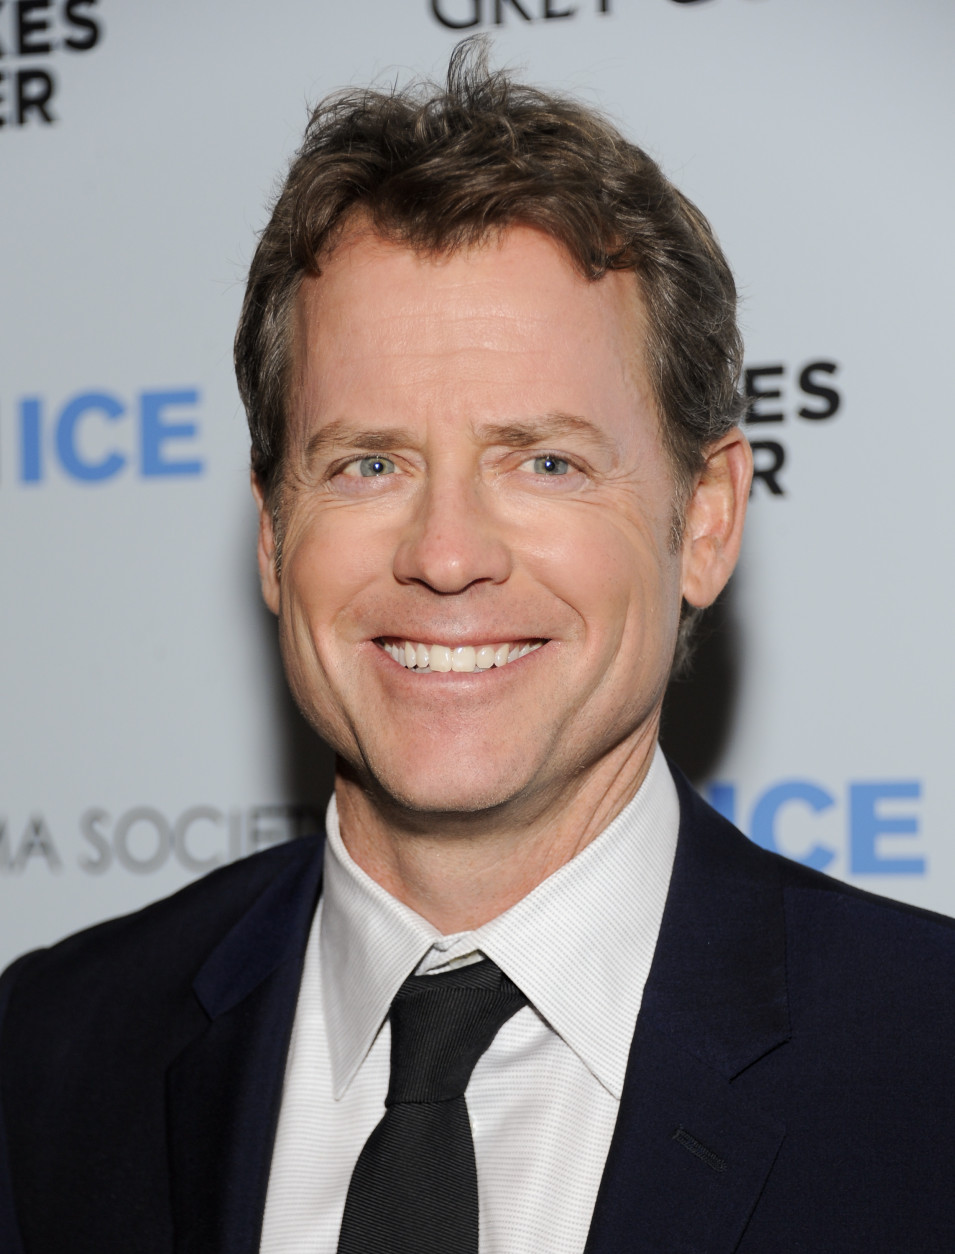 Actor Greg Kinnear attends a special screening of "Thin Ice" hosted by the Cinema Society at the Tribeca Grand Hotel on Monday, Feb. 6, 2012 in New York. (AP Photo/Evan Agostini)